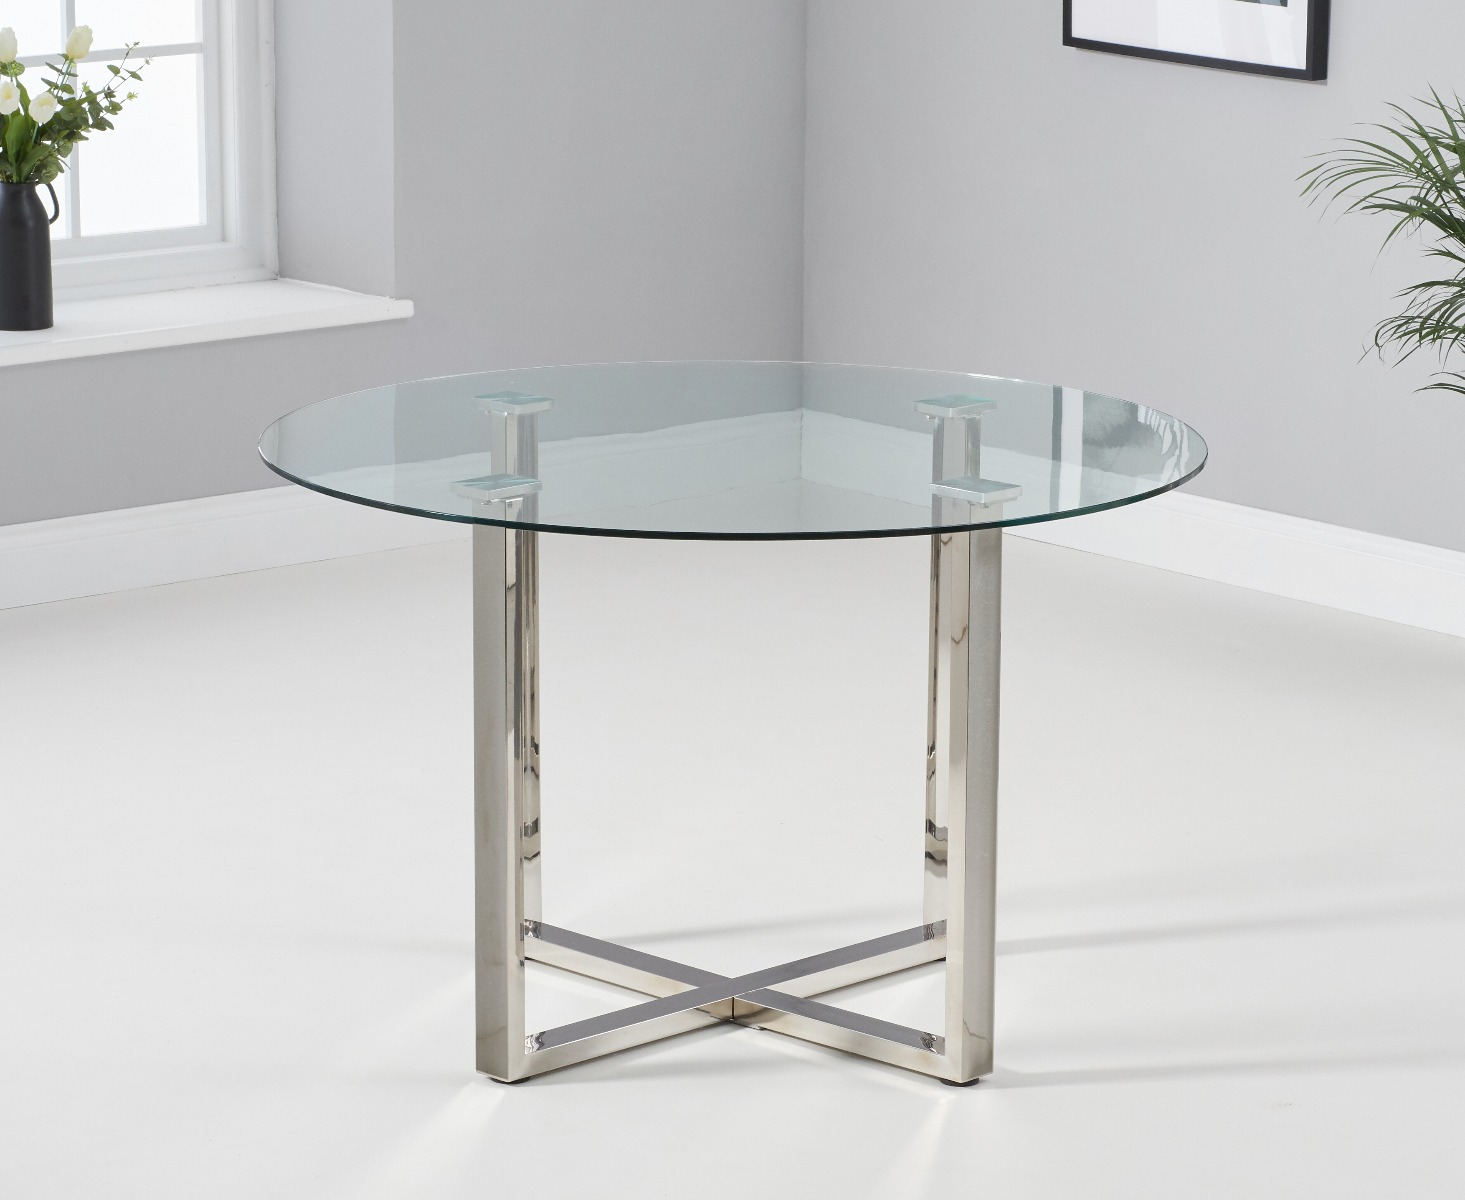 Photo 1 of Vaso 120cm round glass dining table